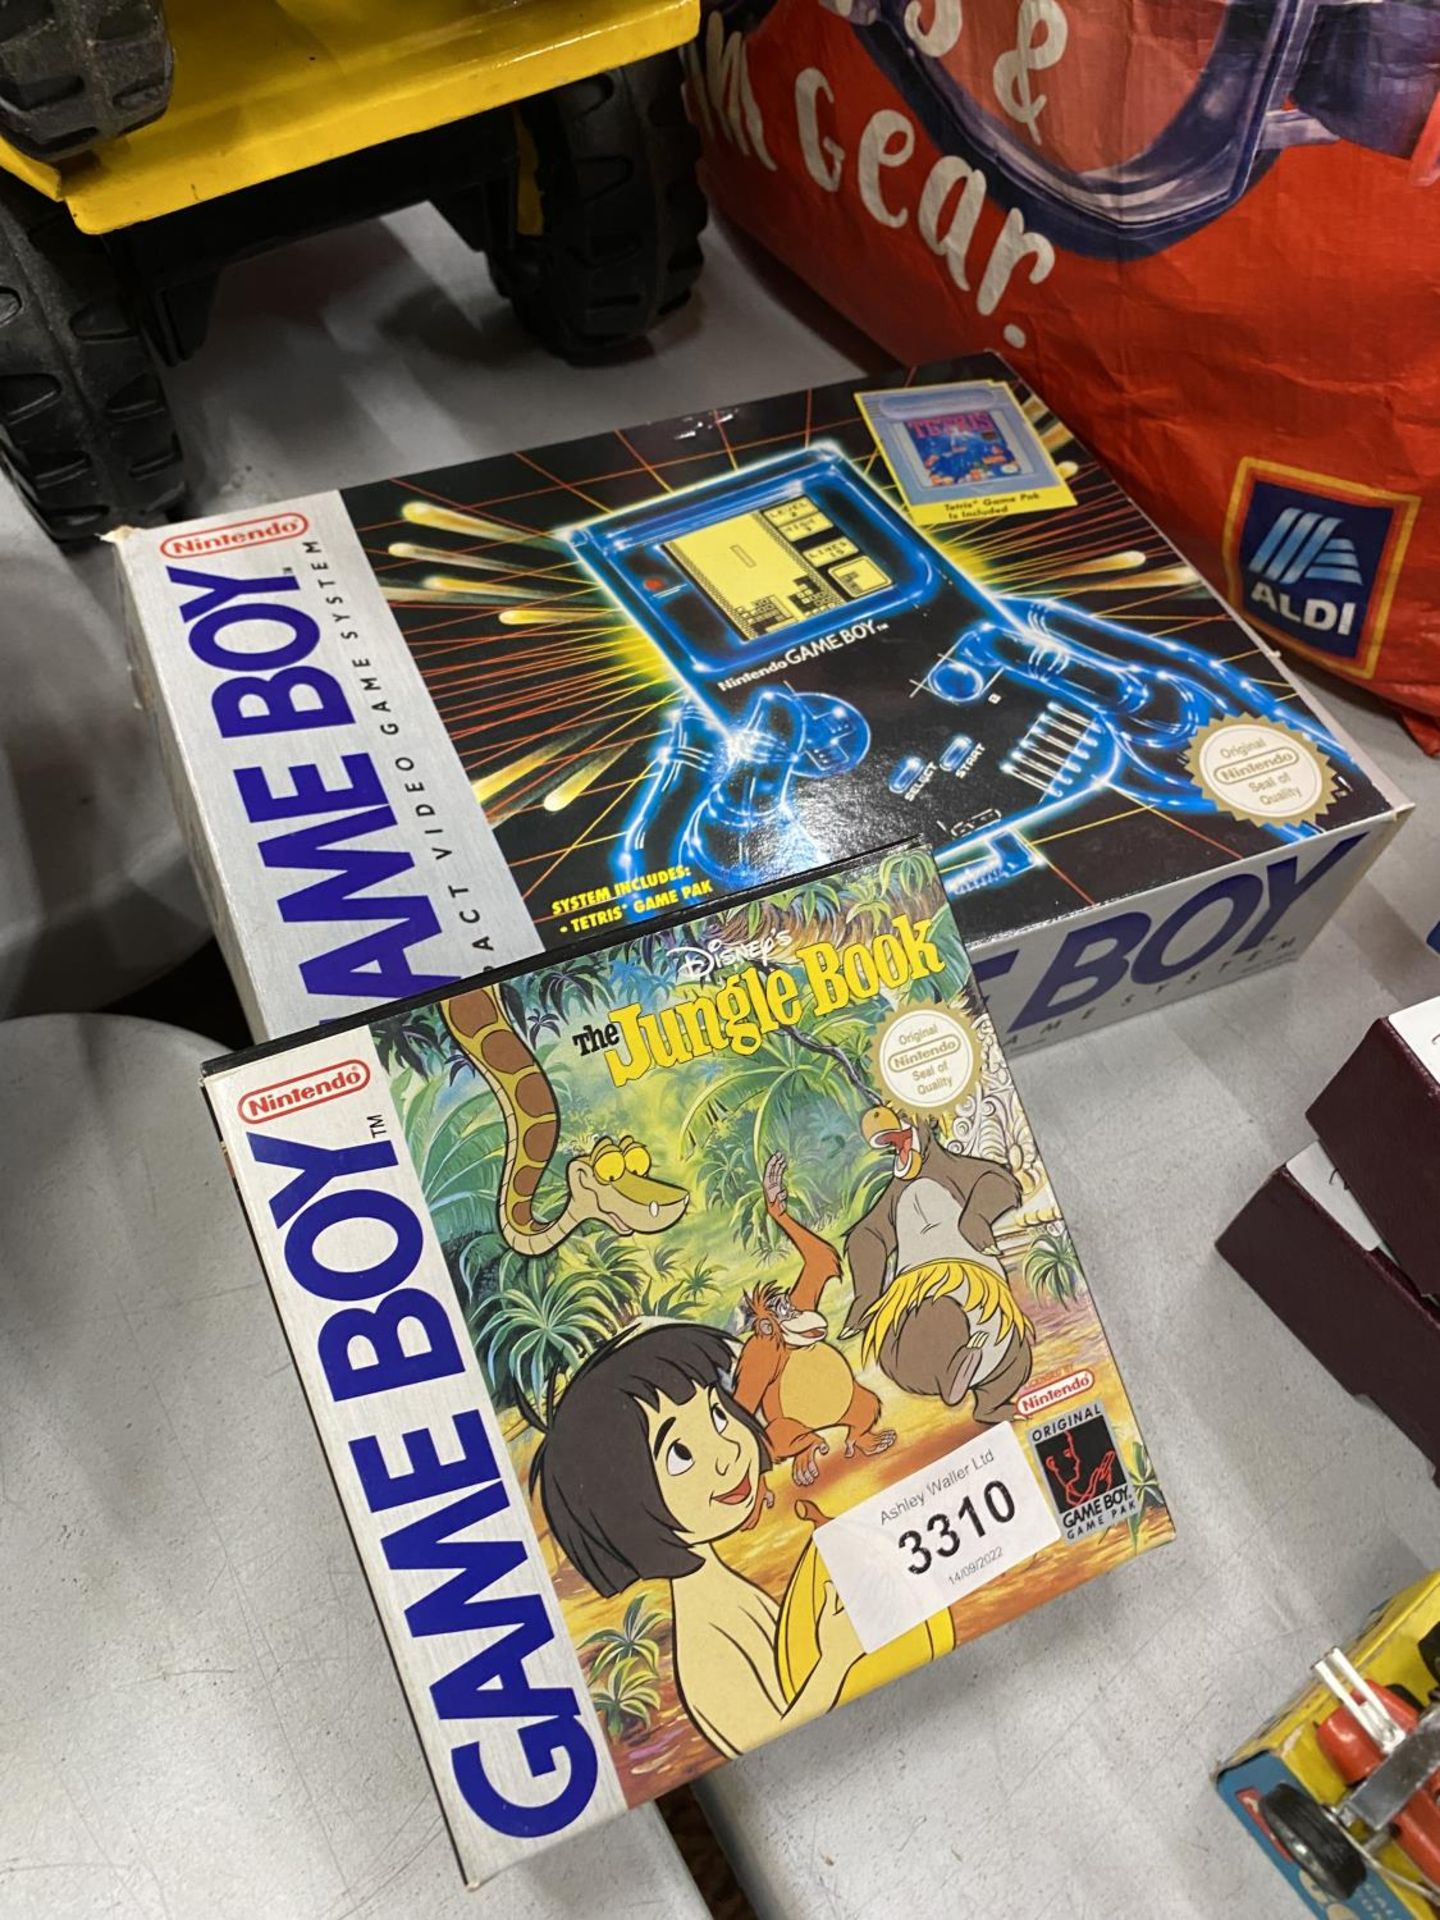 A BOXED NINTENDO GAMEBOY WITH A BOXED GAME JUNGLE BOOK